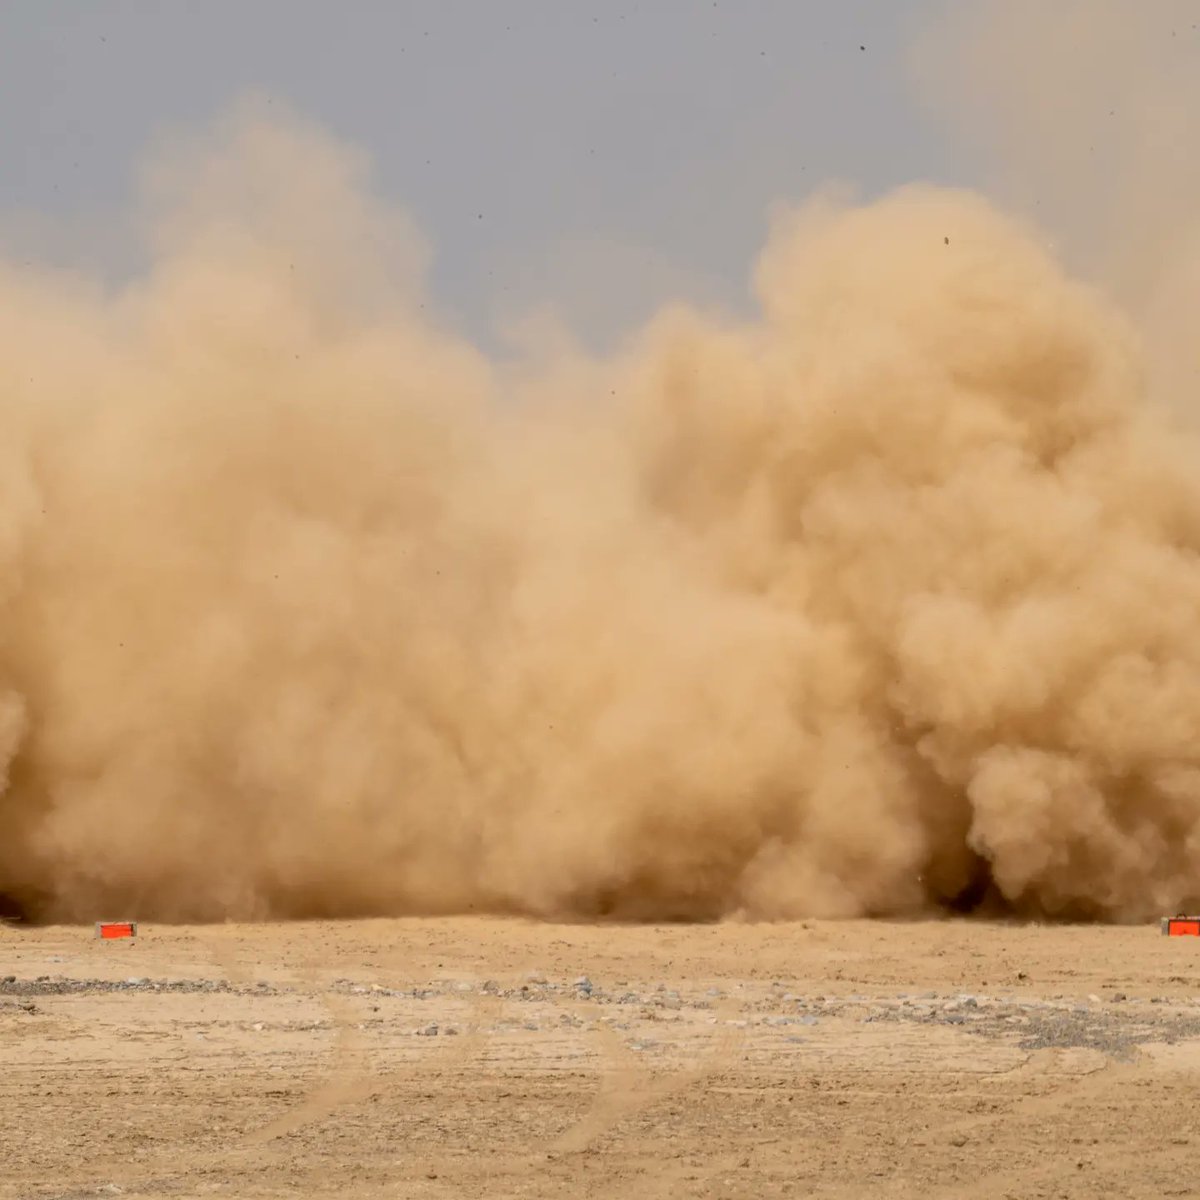 Swipe to Land - A Wildcat 🚁 conducts a dust landing in the desert #ExKHANJAROMAN 661 Sqn have arrived in Oman to hone their desert flying skills. Training in the most challenging environments ensures @1st_AviationBCT are ready to deploy globally. @DefenceOps @ComdJHC @UKinOman